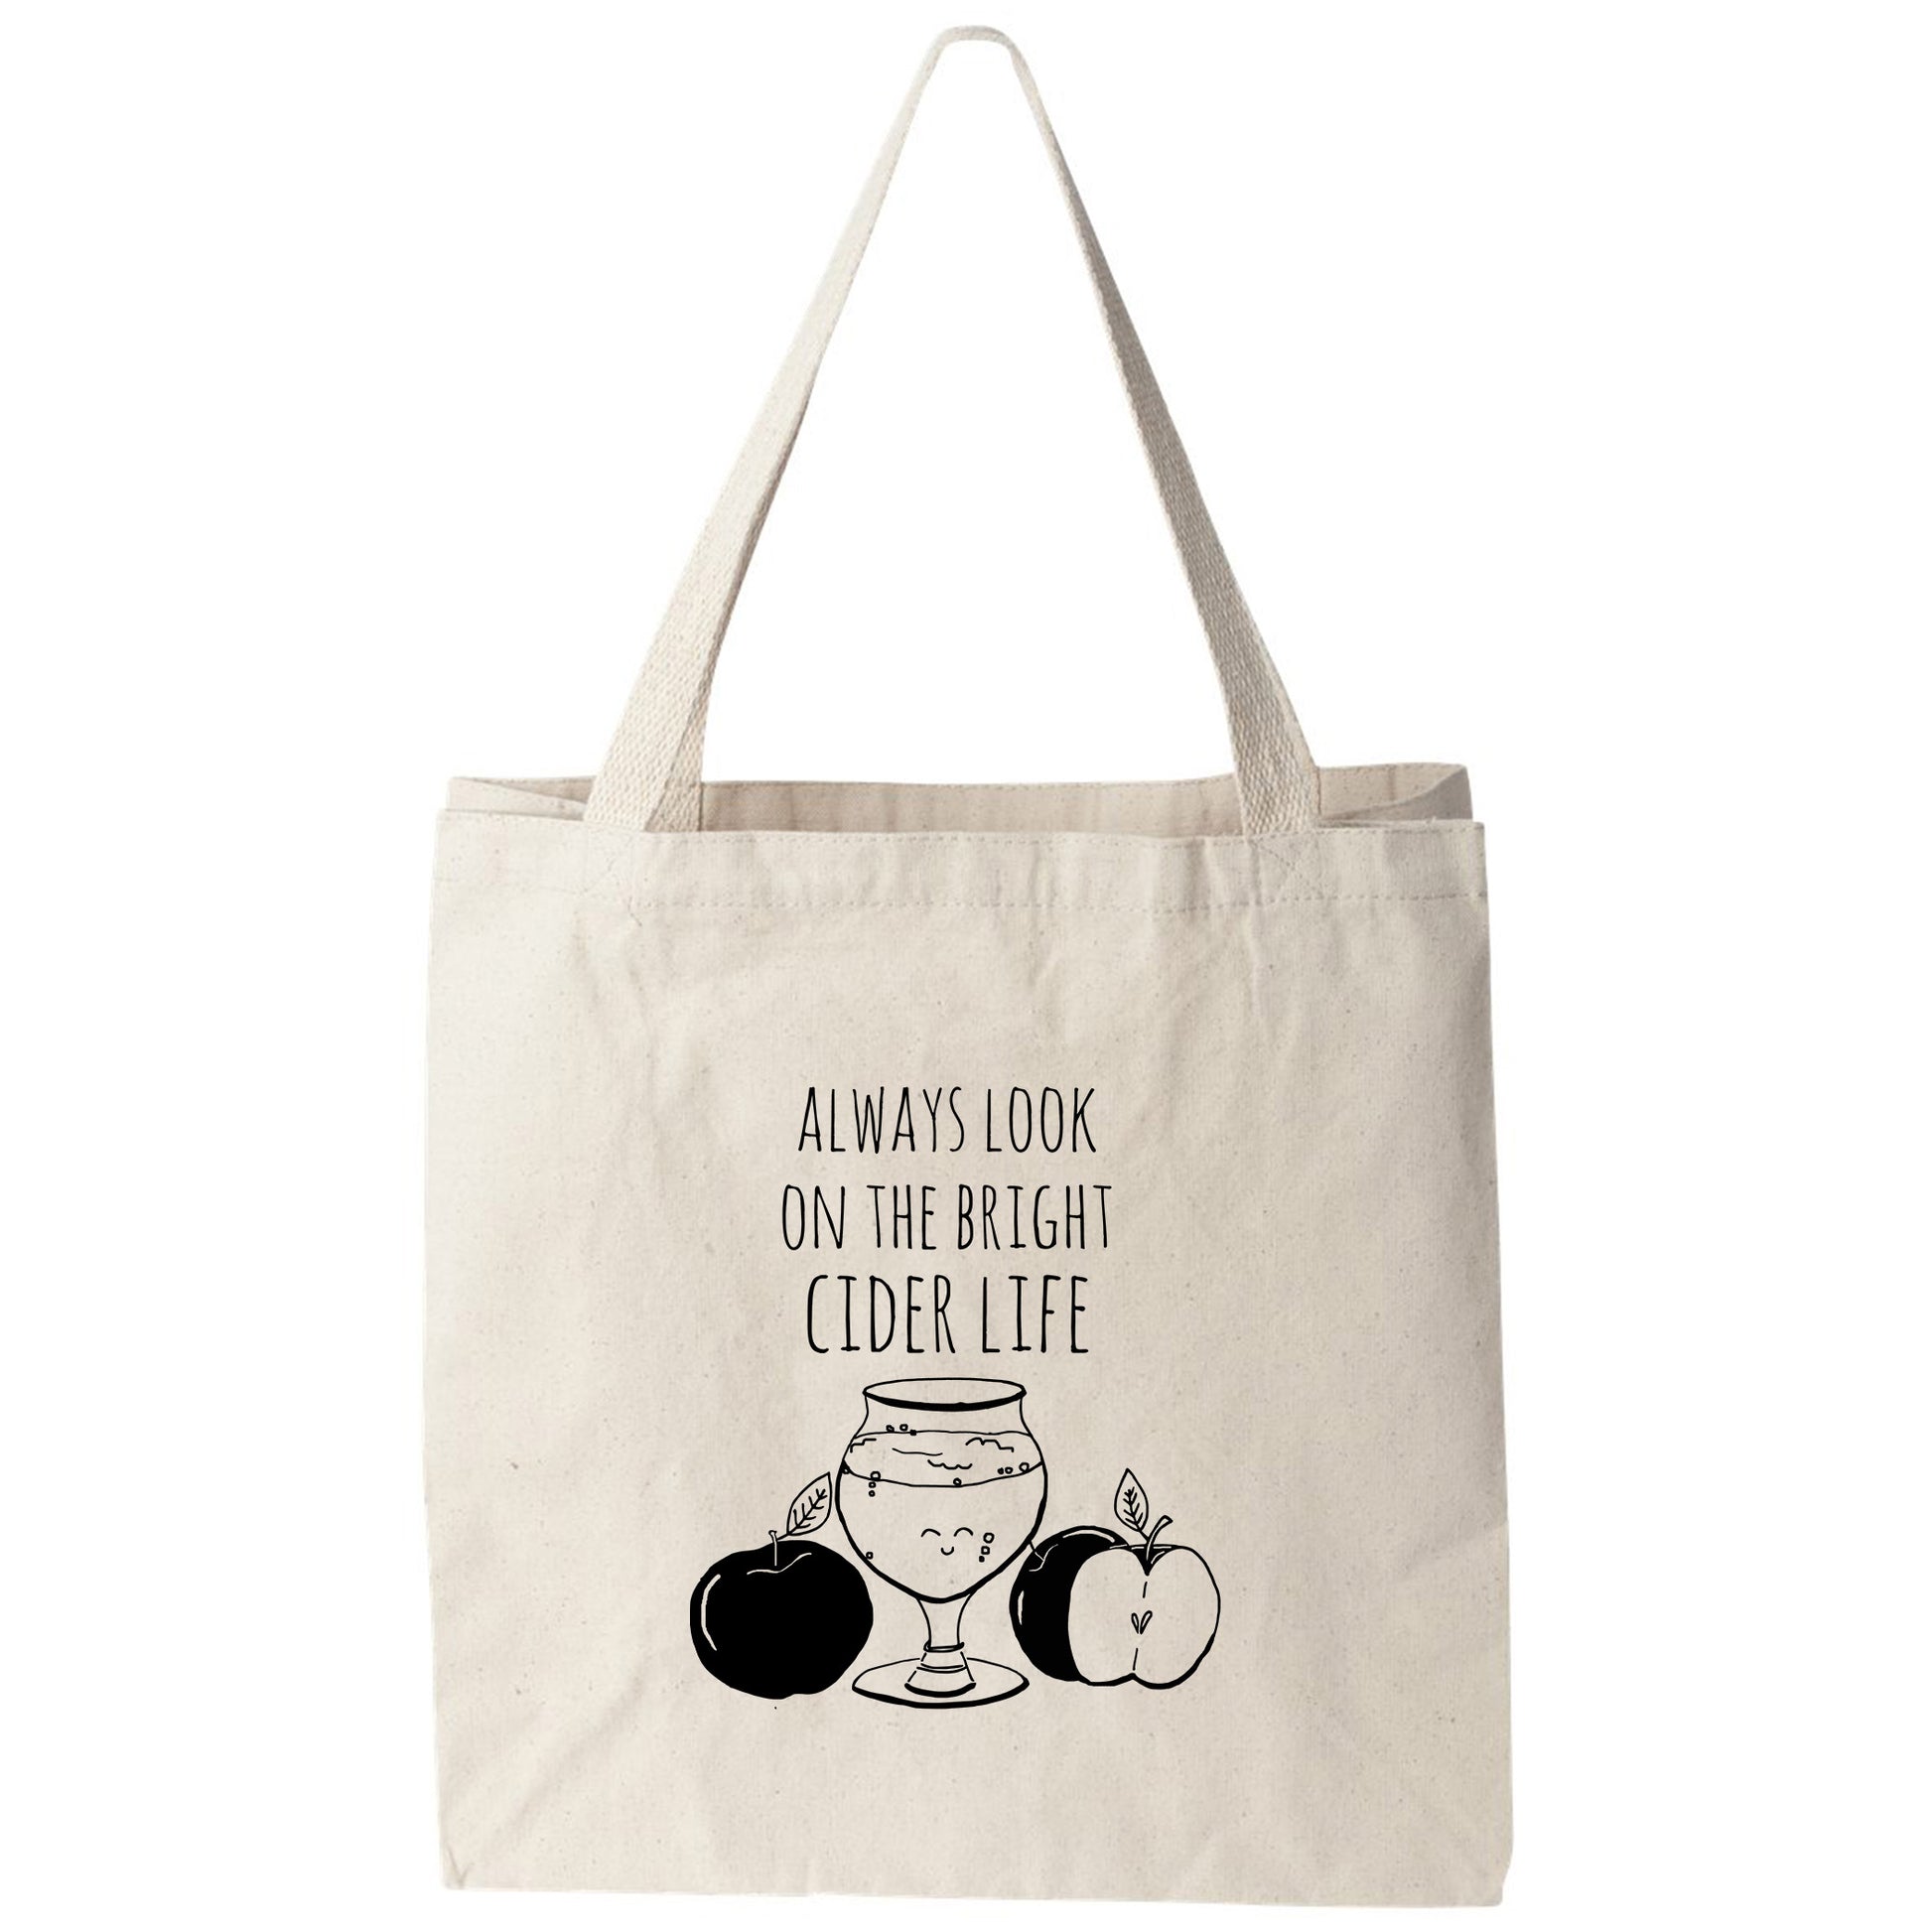 a tote bag that says always look on the bright cider life